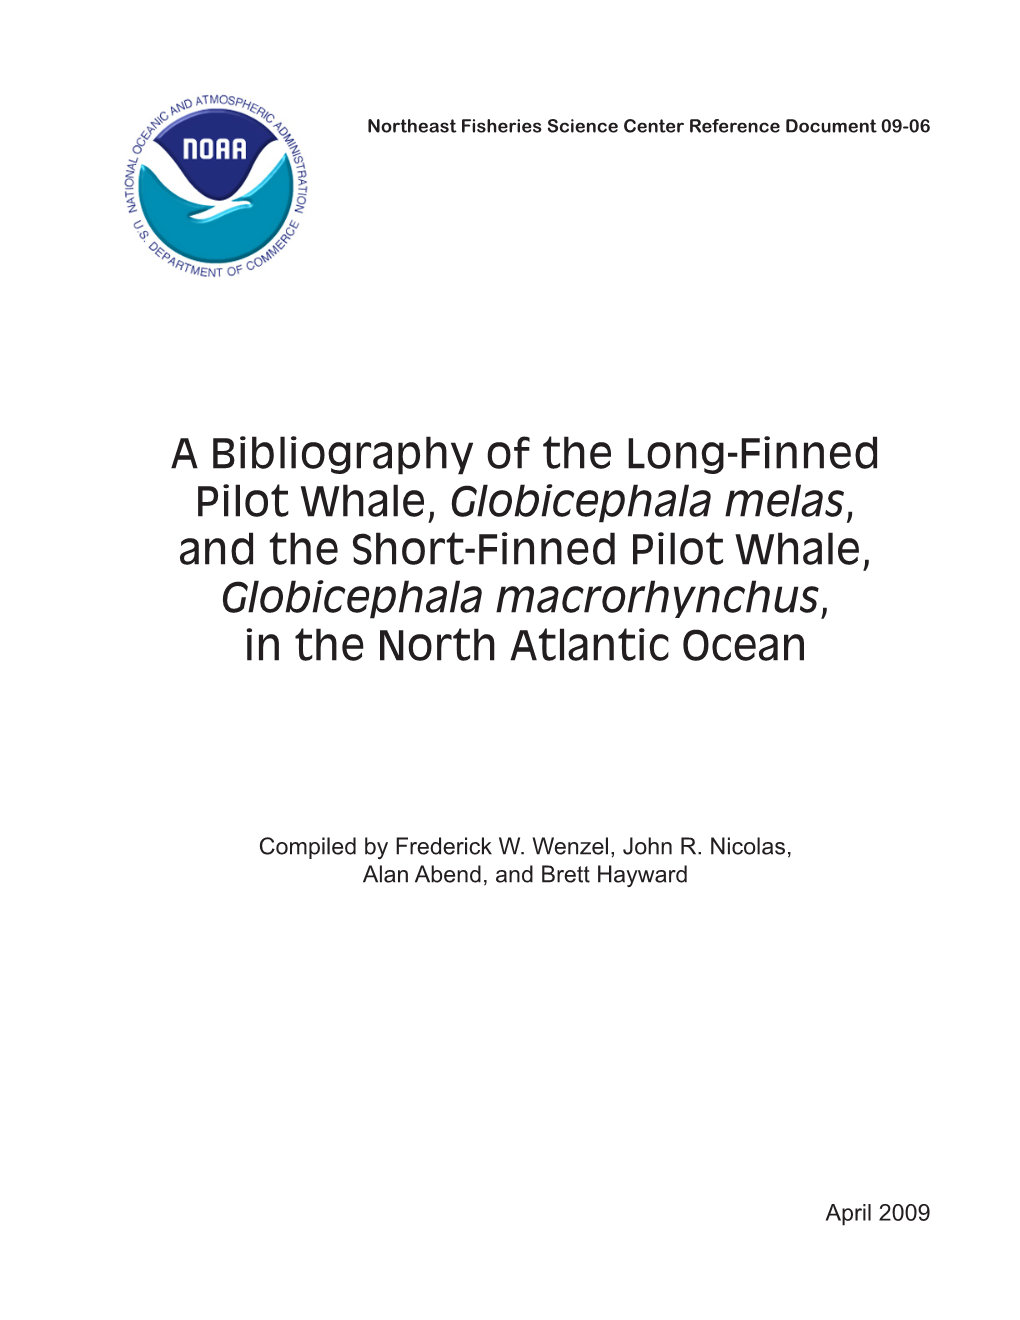 A Bibliography of the Long-Finned Pilot Whale, Globicephala Melas, and the Short-Finned Pilot Whale, Globicephala Macrorhynchus, in the North Atlantic Ocean